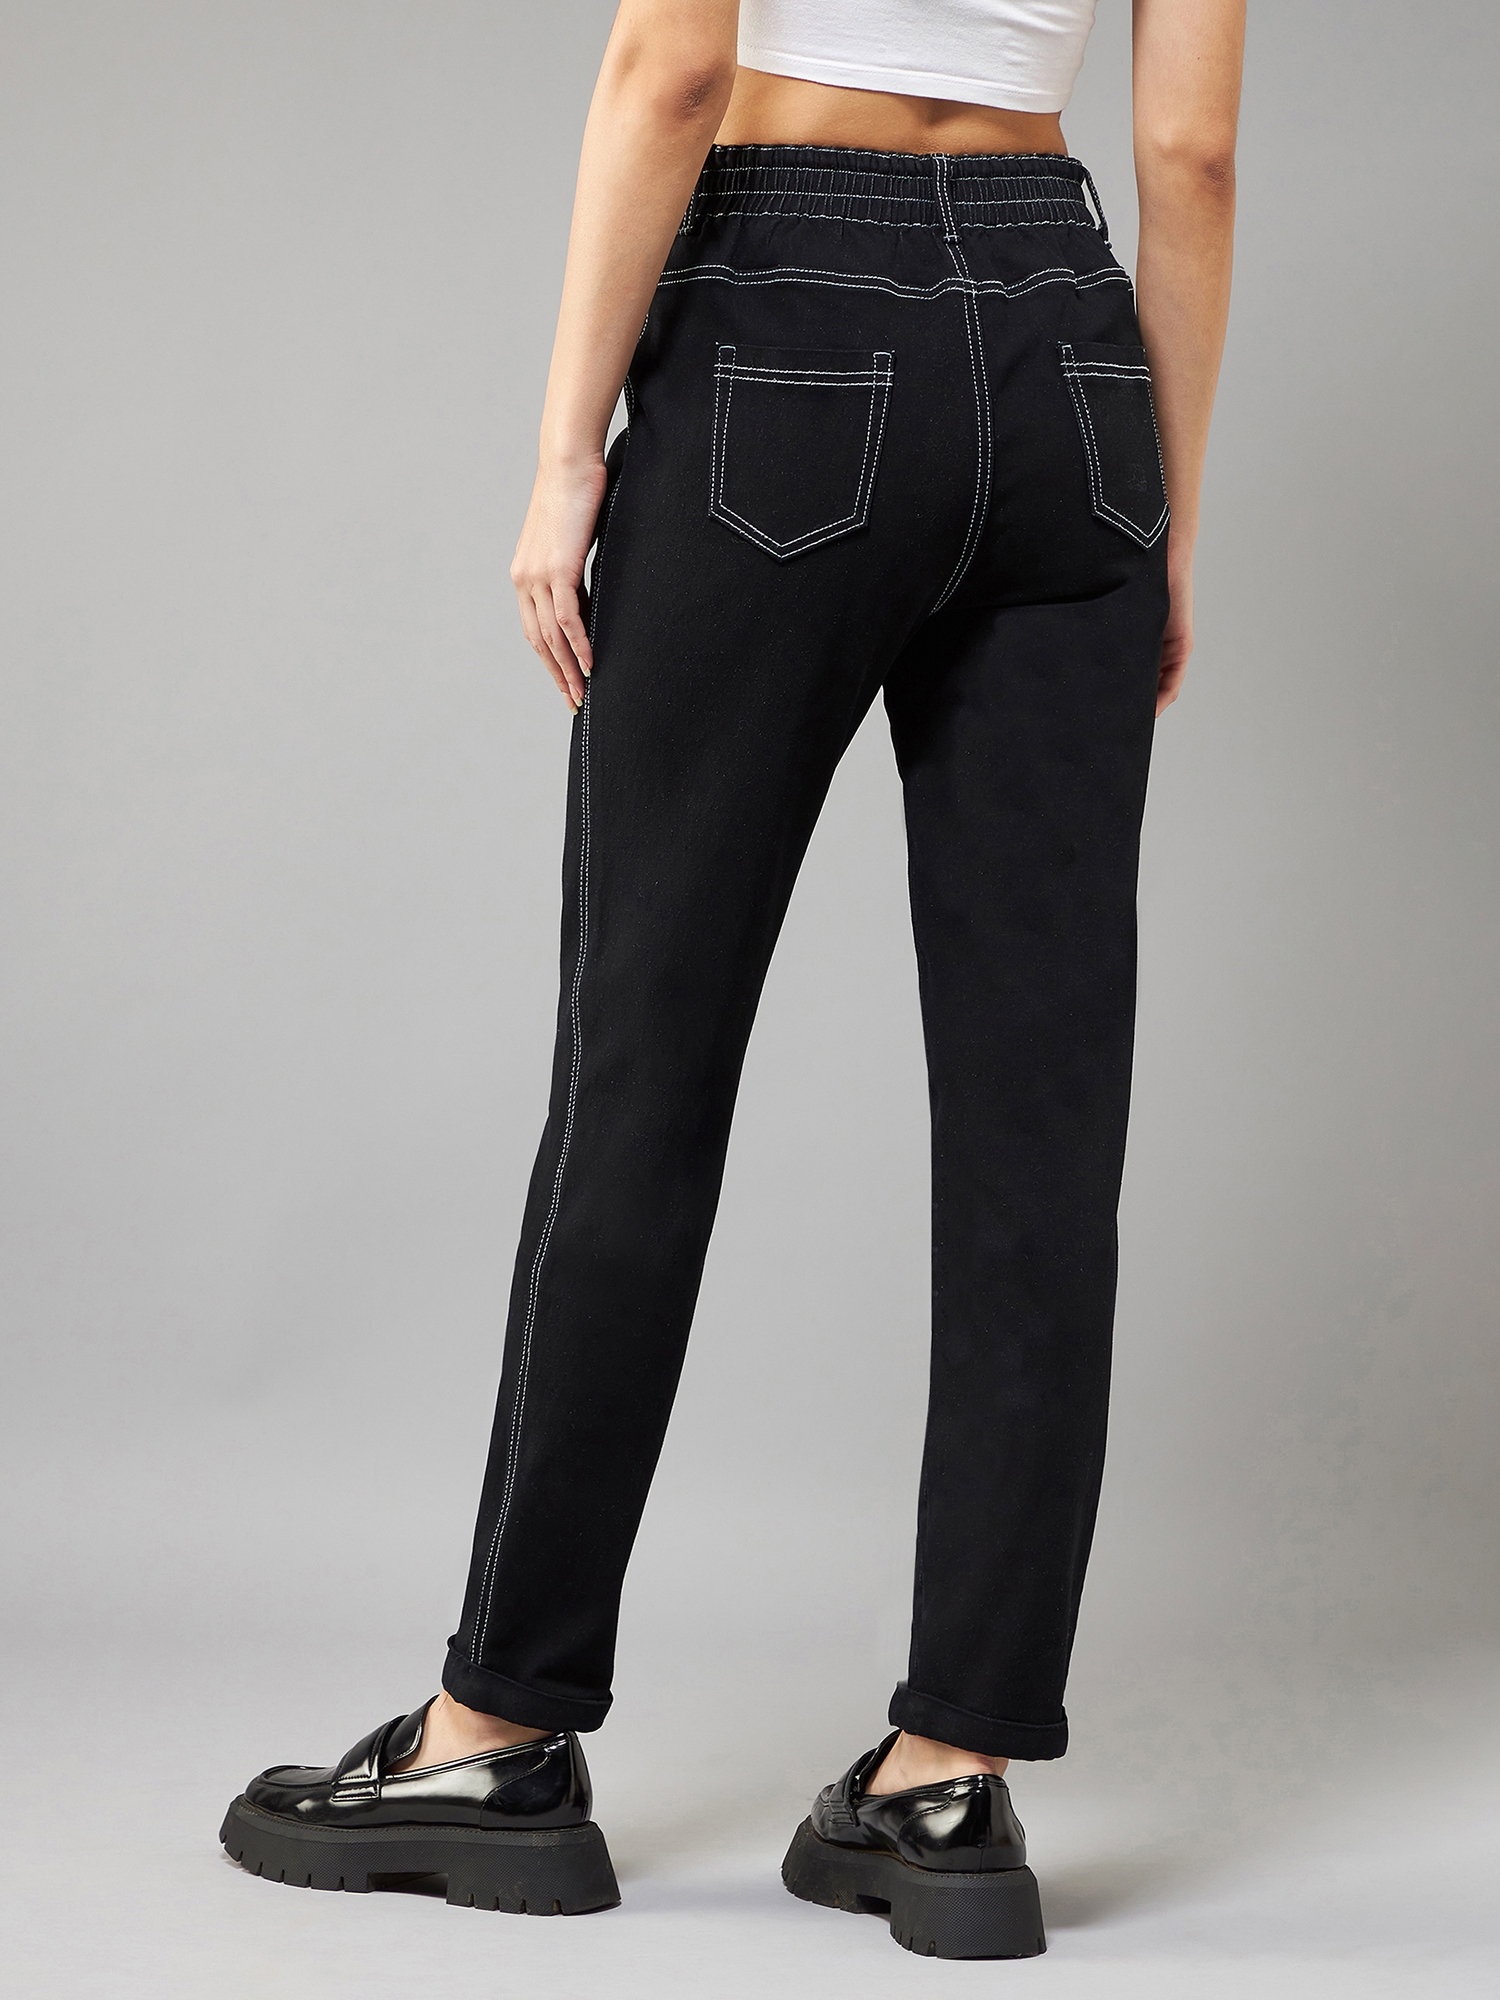 Women's Black Mom's Jean High rise Clean look Regular Stretchable